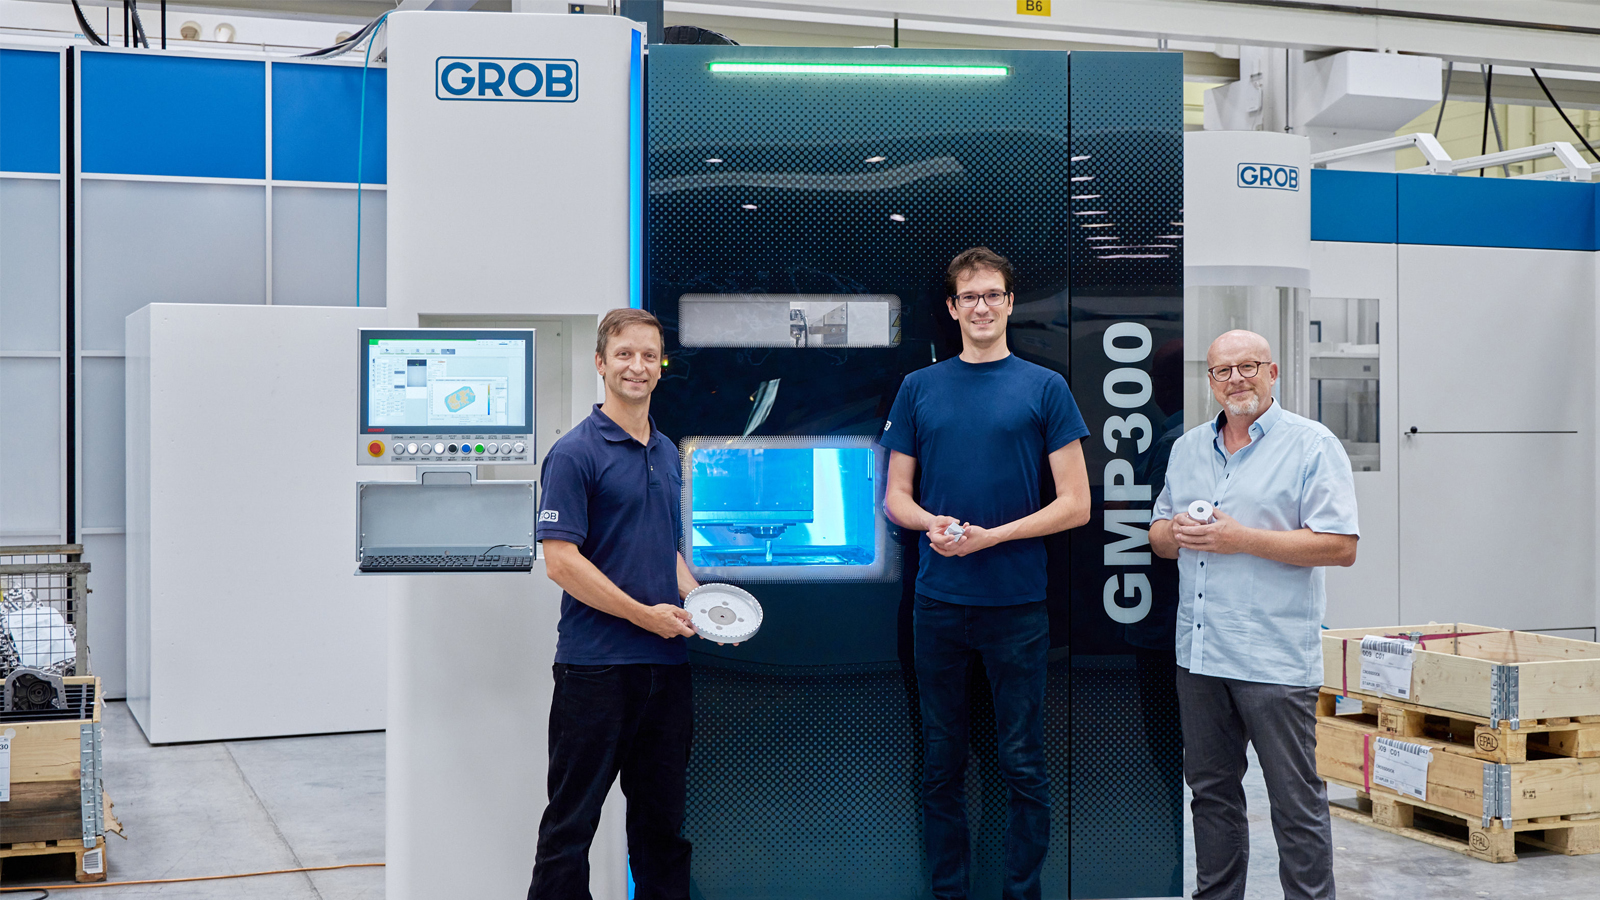 Emanuel Engelsberger and team leader Dr. Johannes Glasschröder, both from the additive manufacturing team at GROB-Werke, and Darius Wala, manager of the Beckhoff Munich branch, in front of the state-of-the-art and attractively designed GMP300 (from left to right).